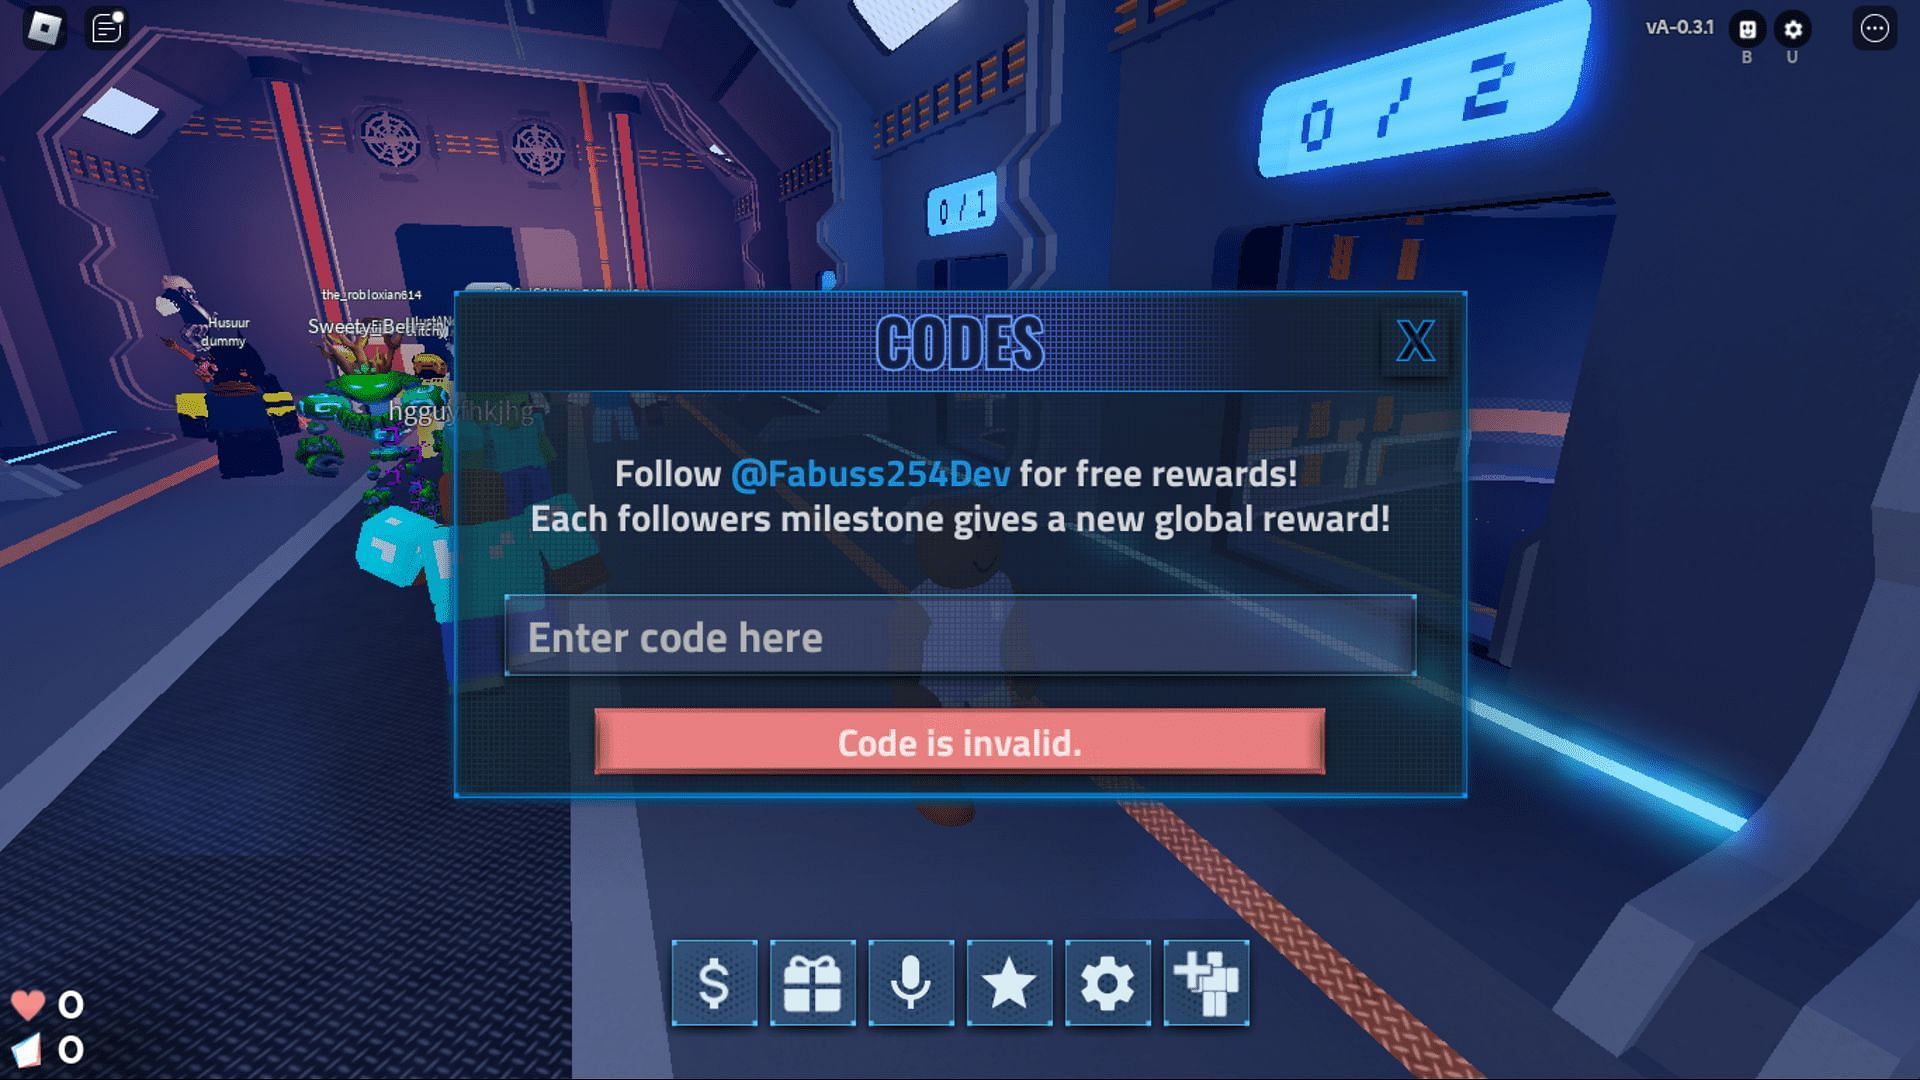 Troubleshoot codes in Descent with ease (Image via Roblox)